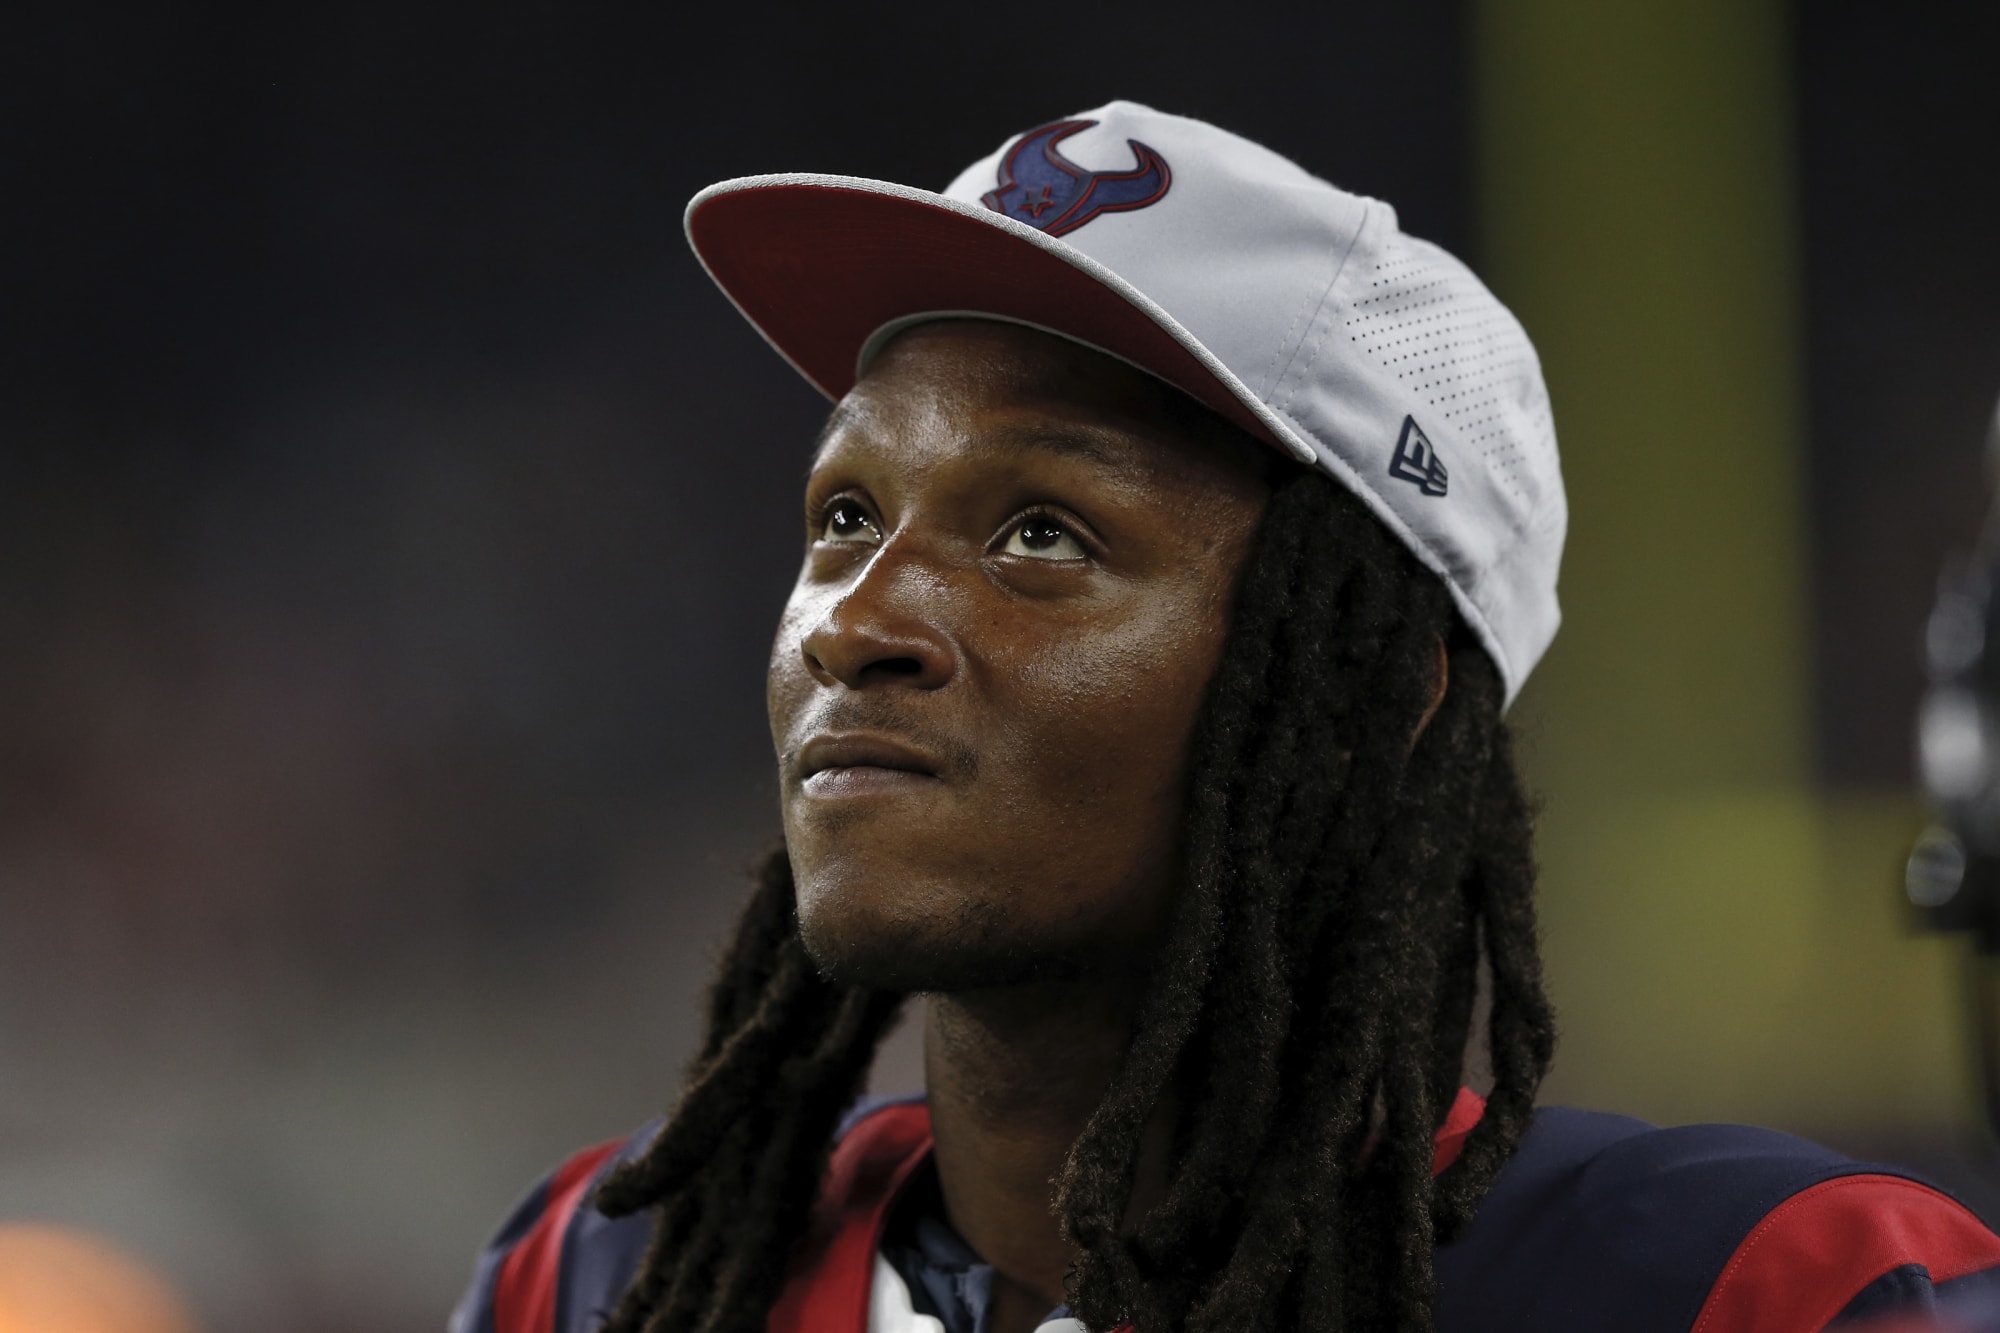 Parties at home owned by former Houston Texans star DeAndre Hopkins  bothering neighbors - ABC13 Houston